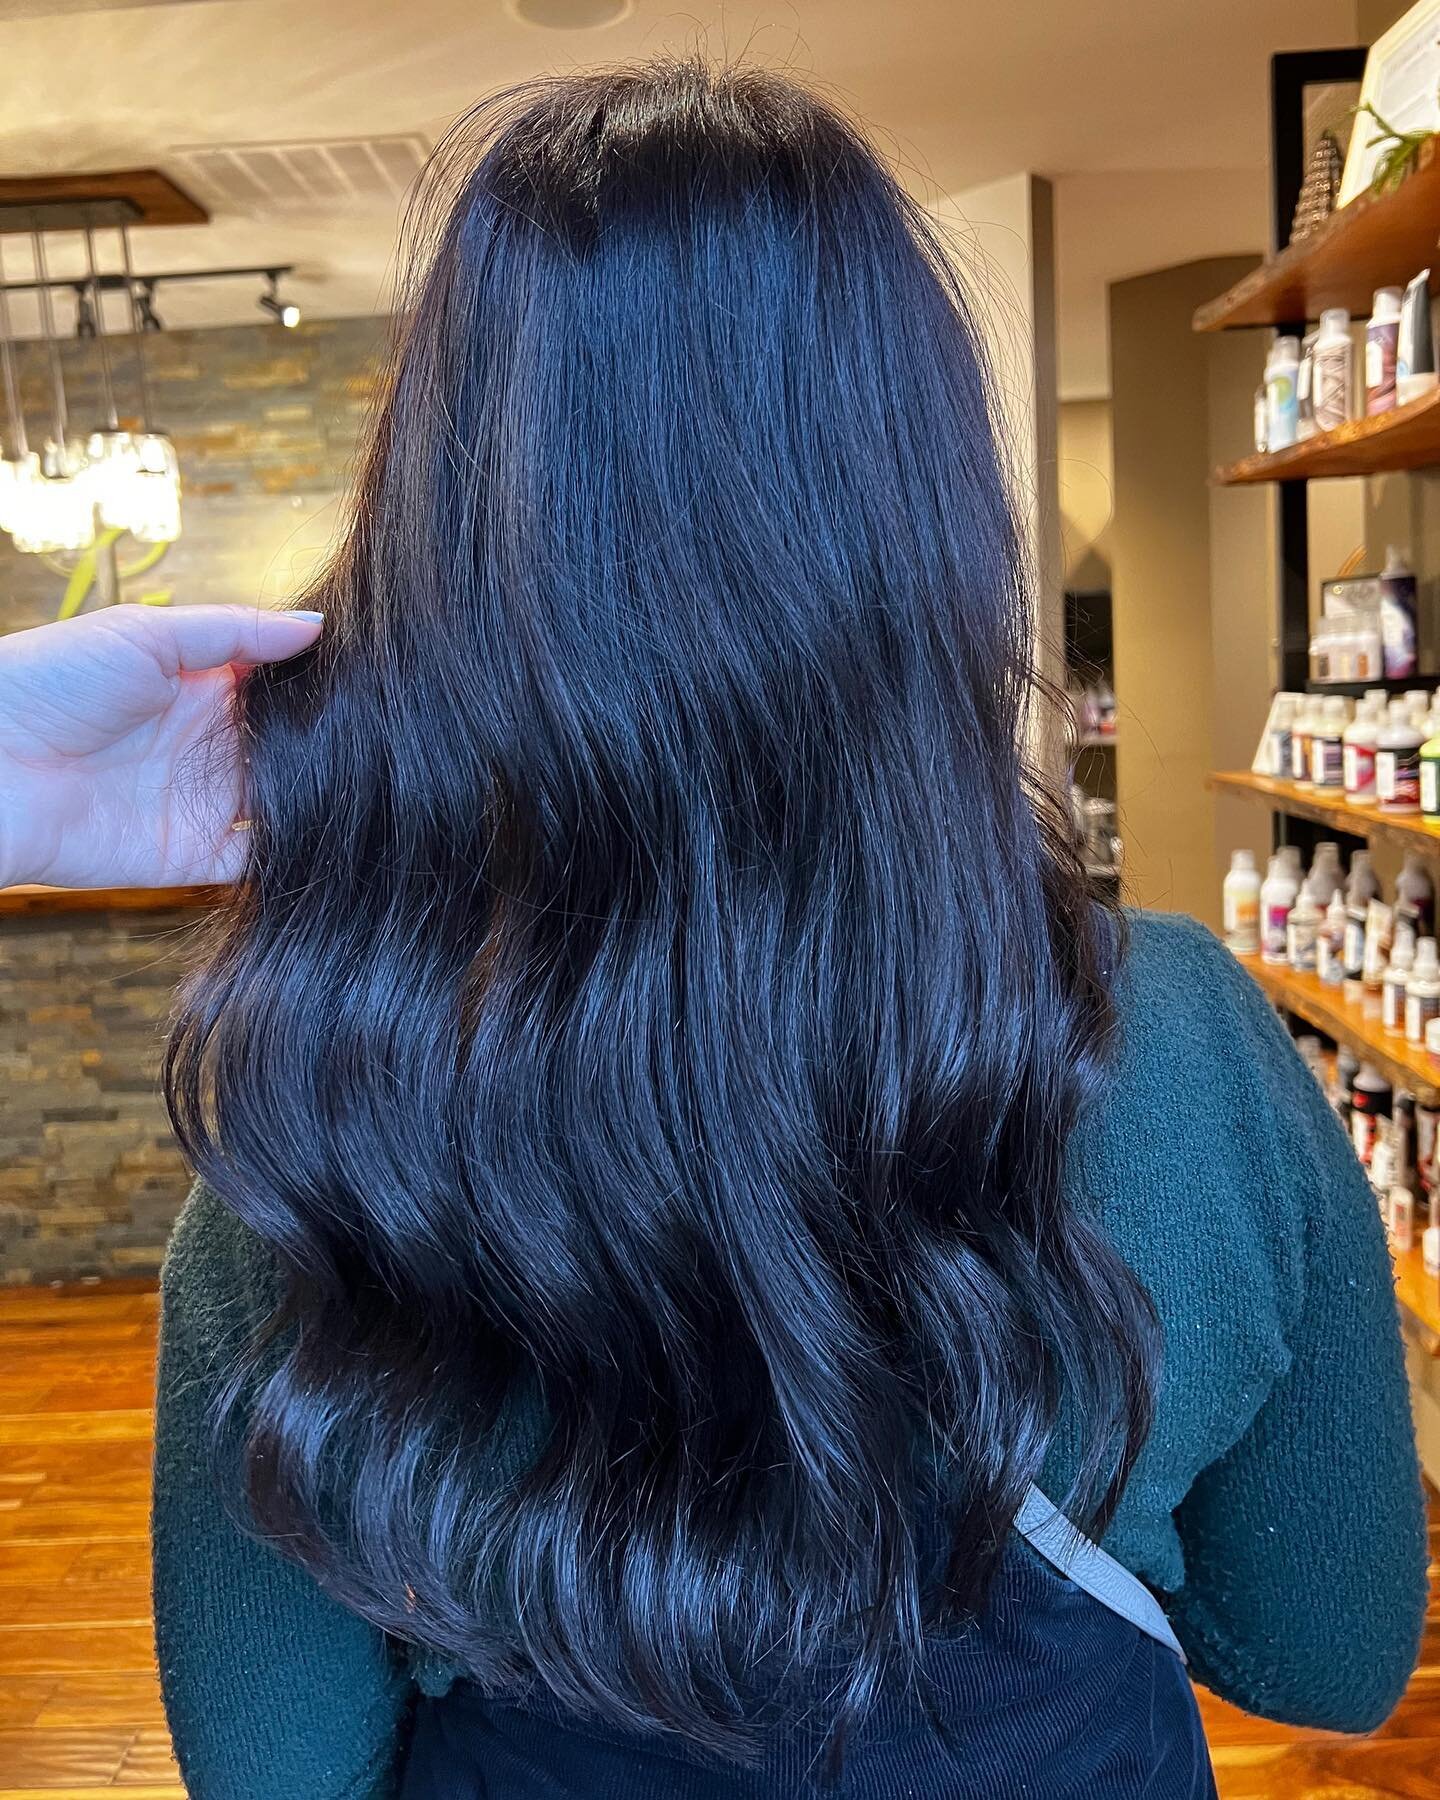 This client came in with warm faded color and walked out after her appointment with @manha1978 with color that looked so perfectly natural. 
⠀⠀⠀⠀⠀⠀⠀⠀⠀
Styled with//
Smooth Again by @kevin.murphy 
Velvet Curtain @randco 
⠀⠀⠀⠀⠀⠀⠀⠀⠀
-
-
-
#haircut #issa